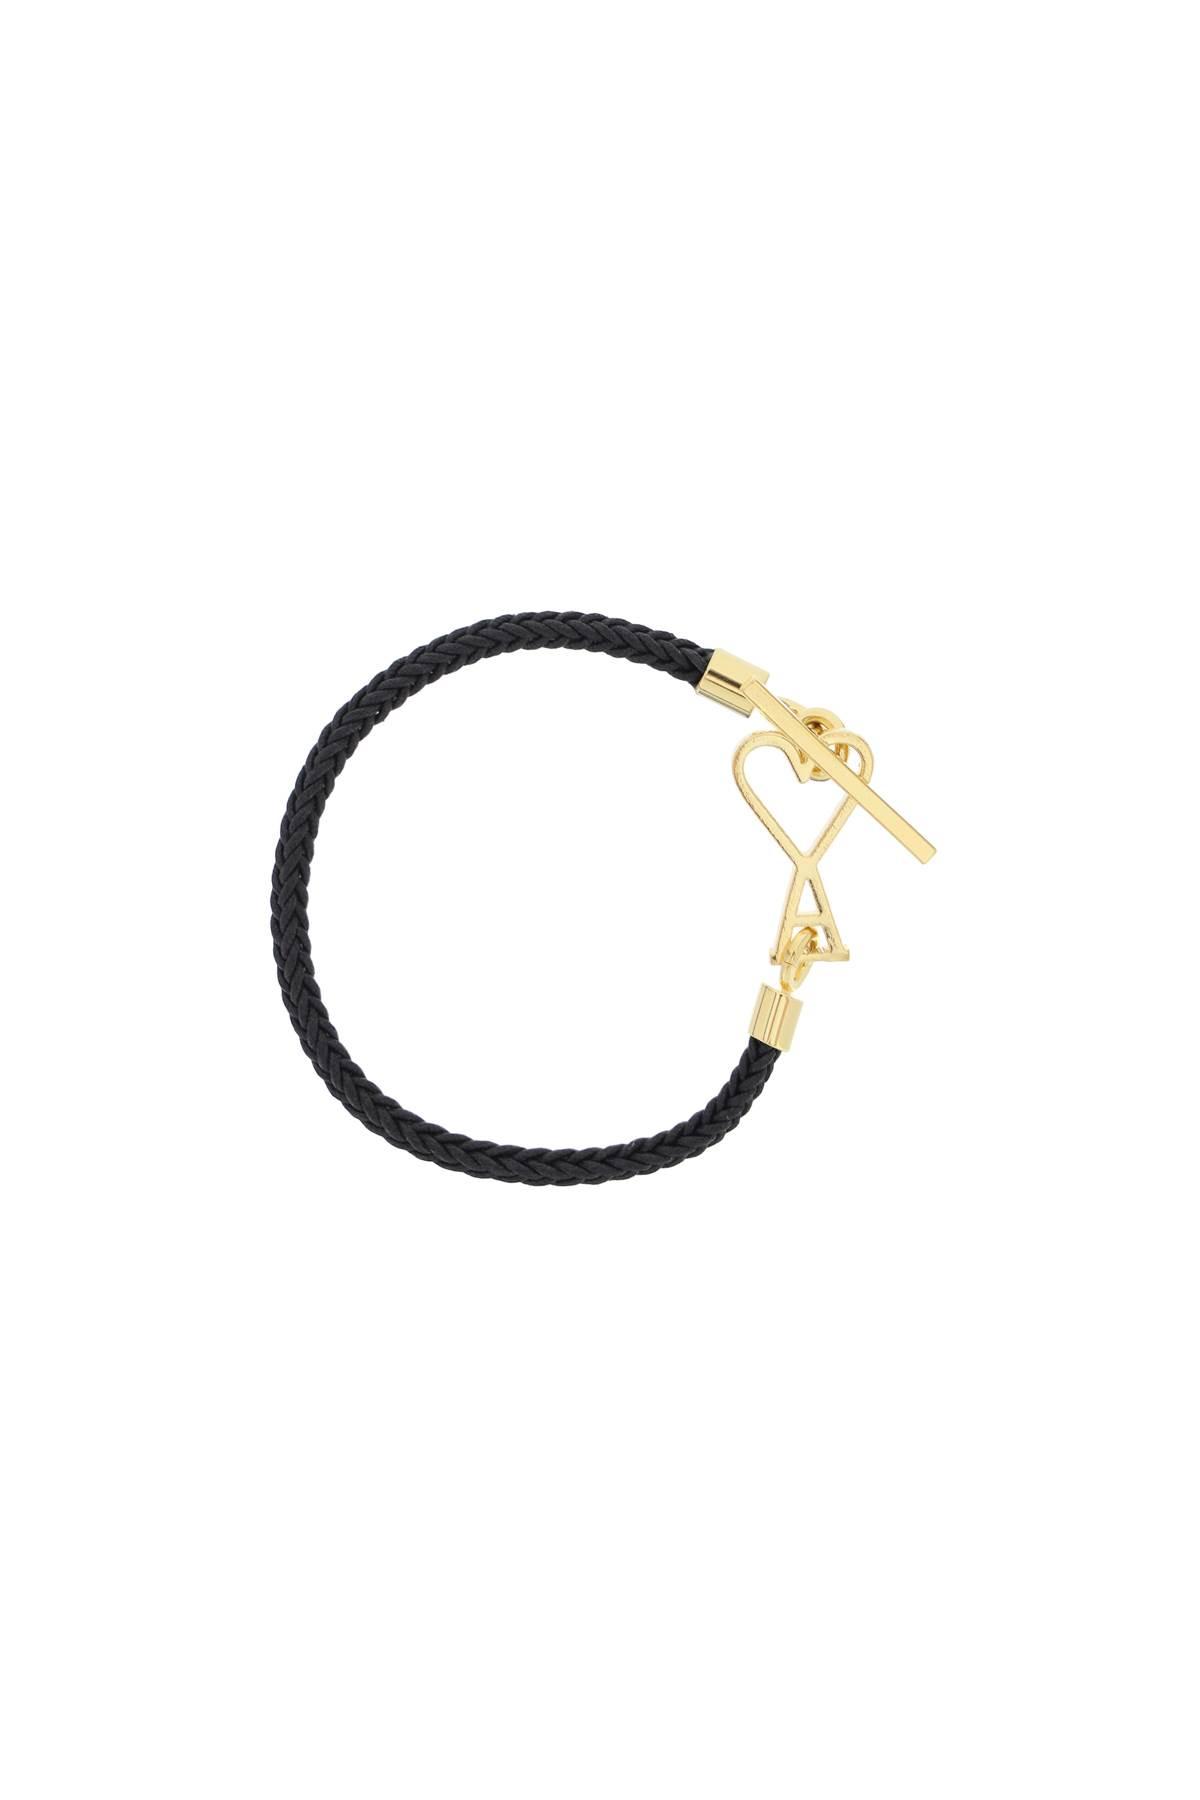 AMI ALEXANDRE MATTIUSSI AMI ALEXANDRE MATTIUSSI Rope bracelet with cord